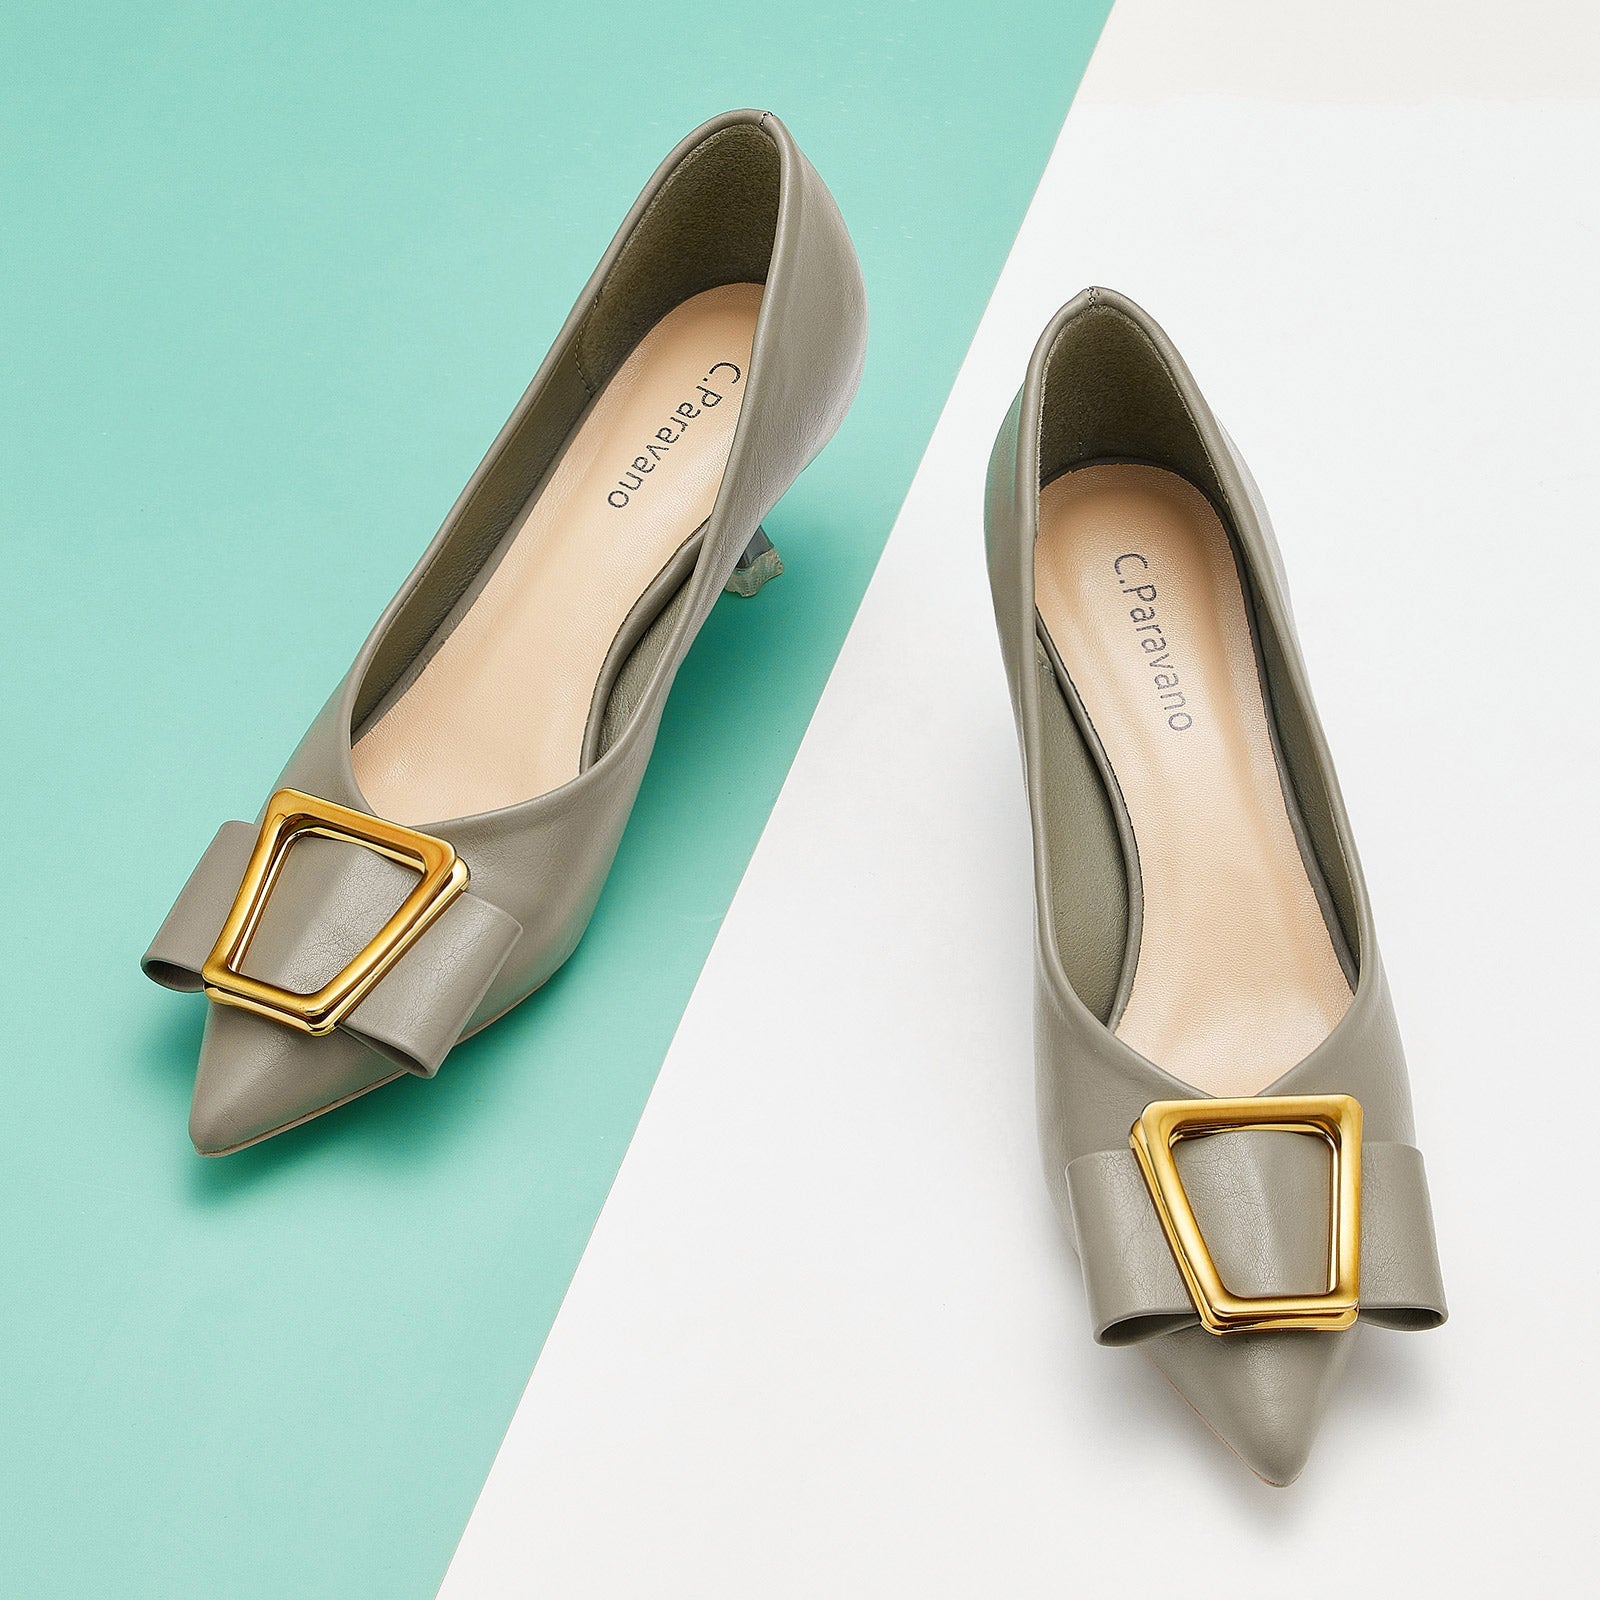 Grey Grace: Grey Women Pumps featuring geometric patterns, offering a refined and contemporary option for any occasion